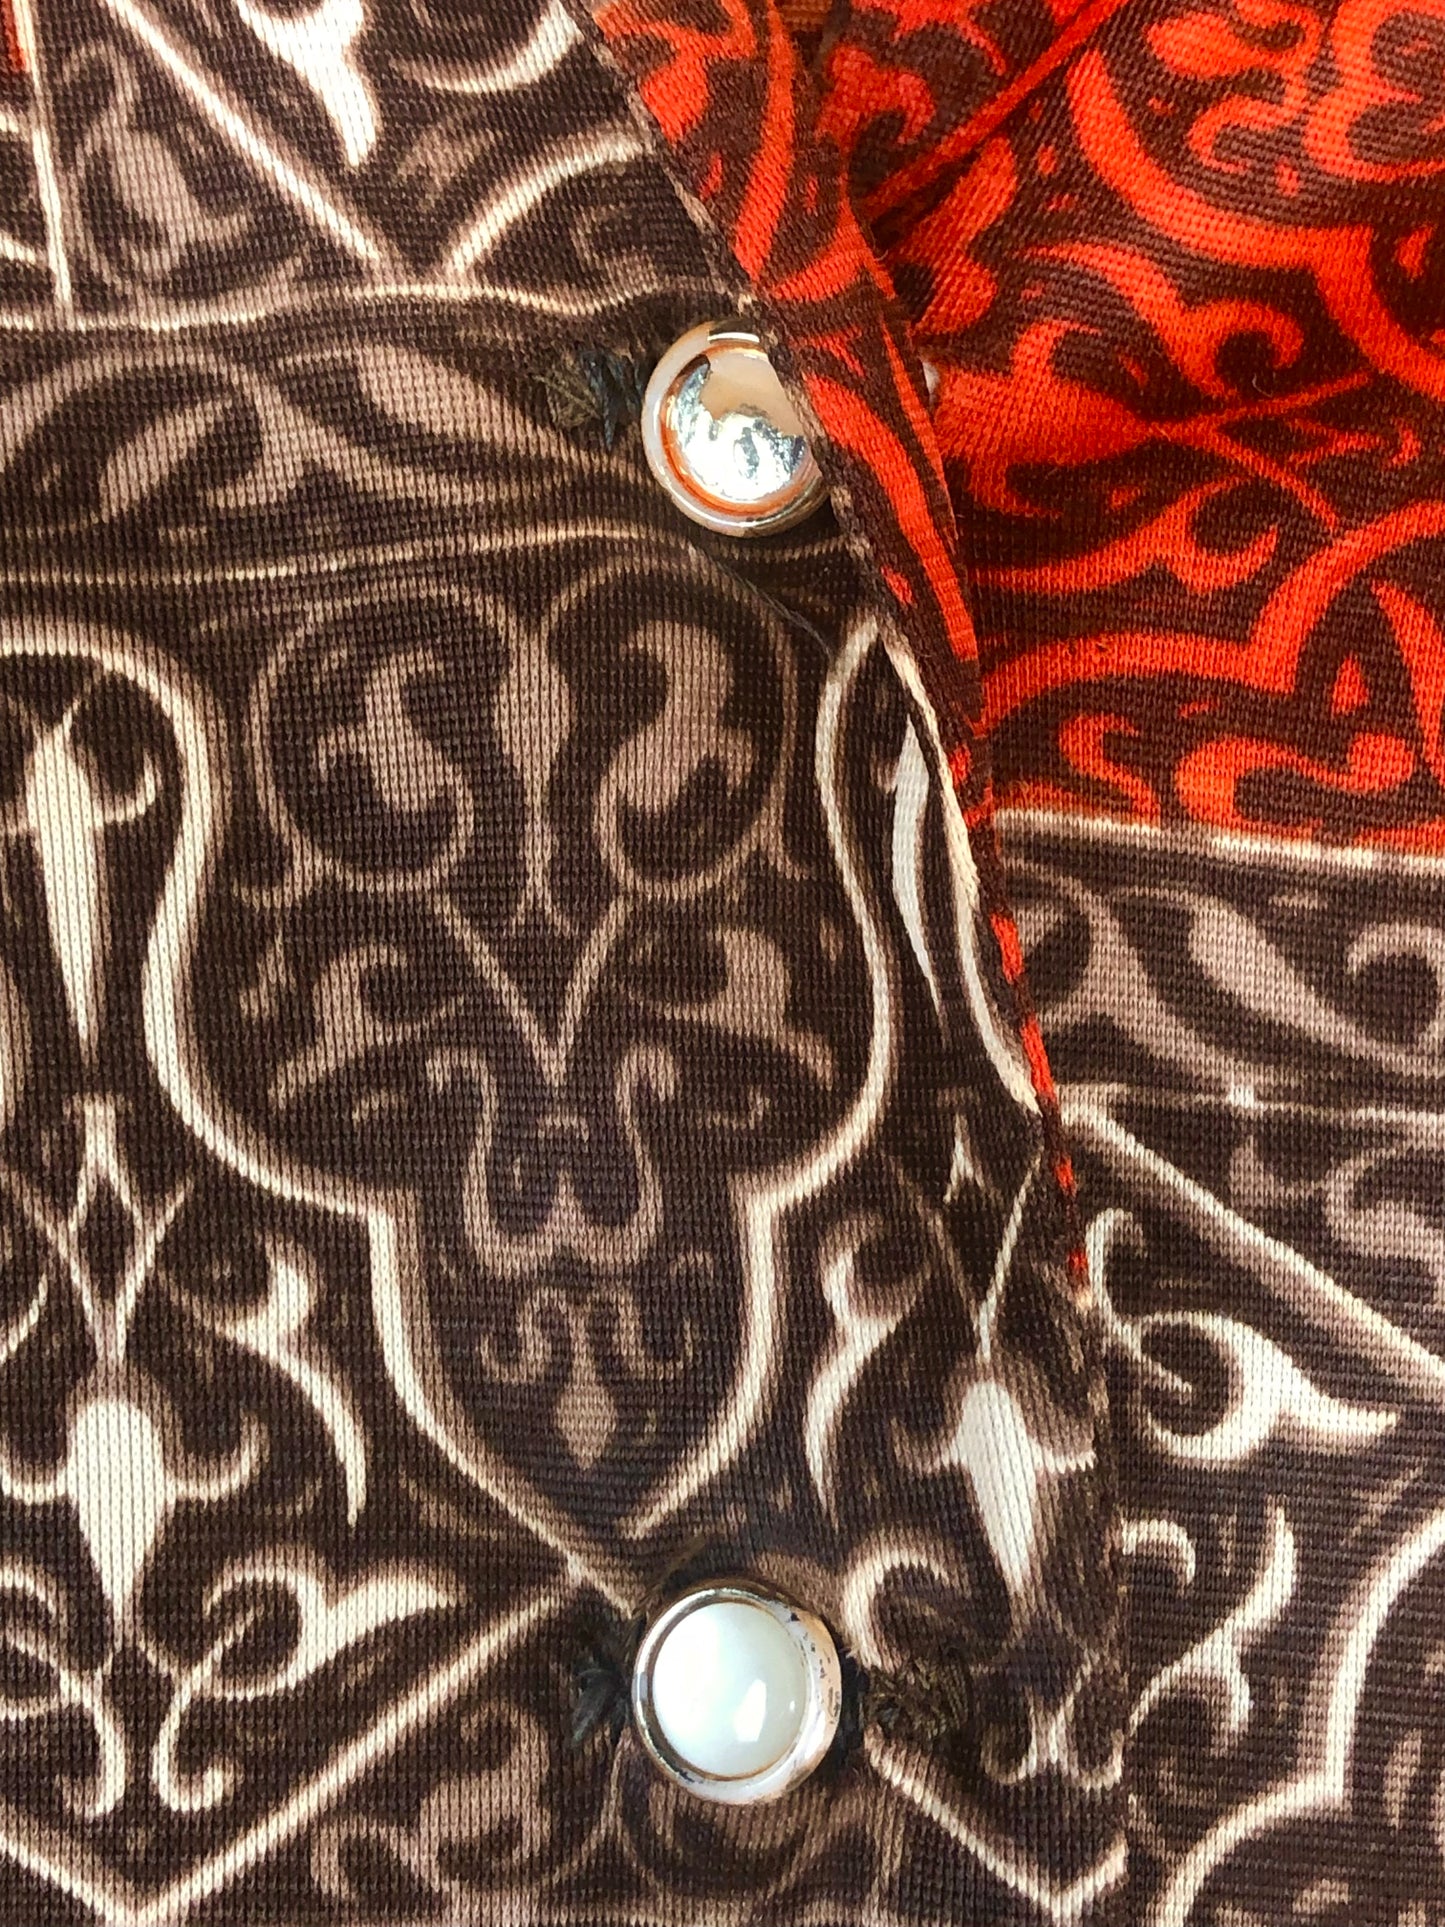 1960's Red-Brown Dress With Unique Print